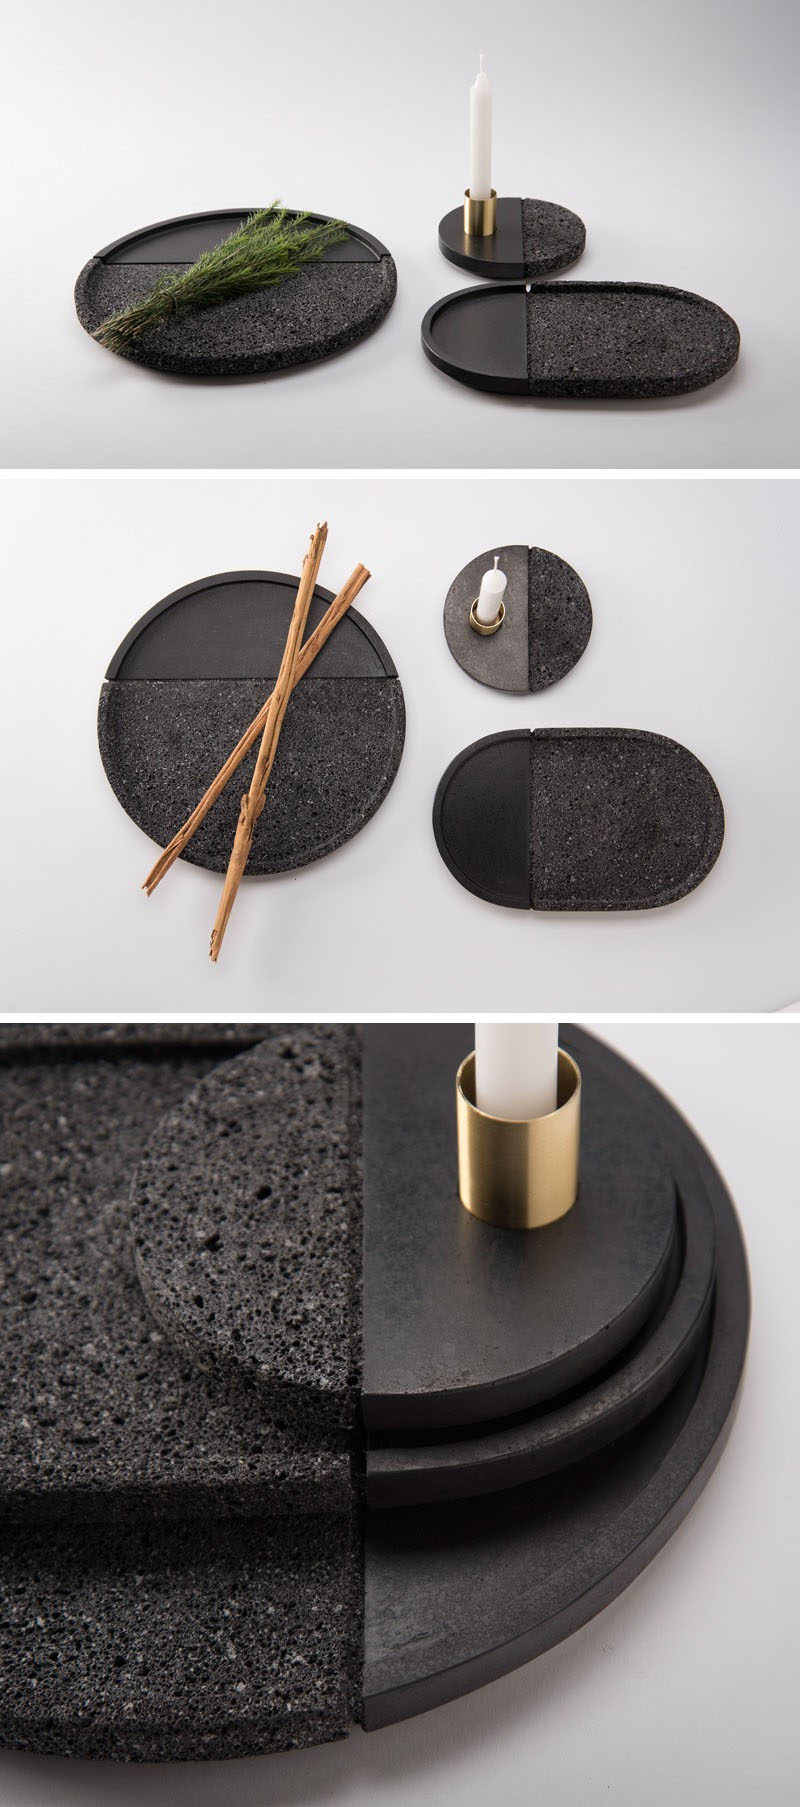 PECA have designed LAVA, a set of decorative plates carved from volcanic stone with a brass accent.